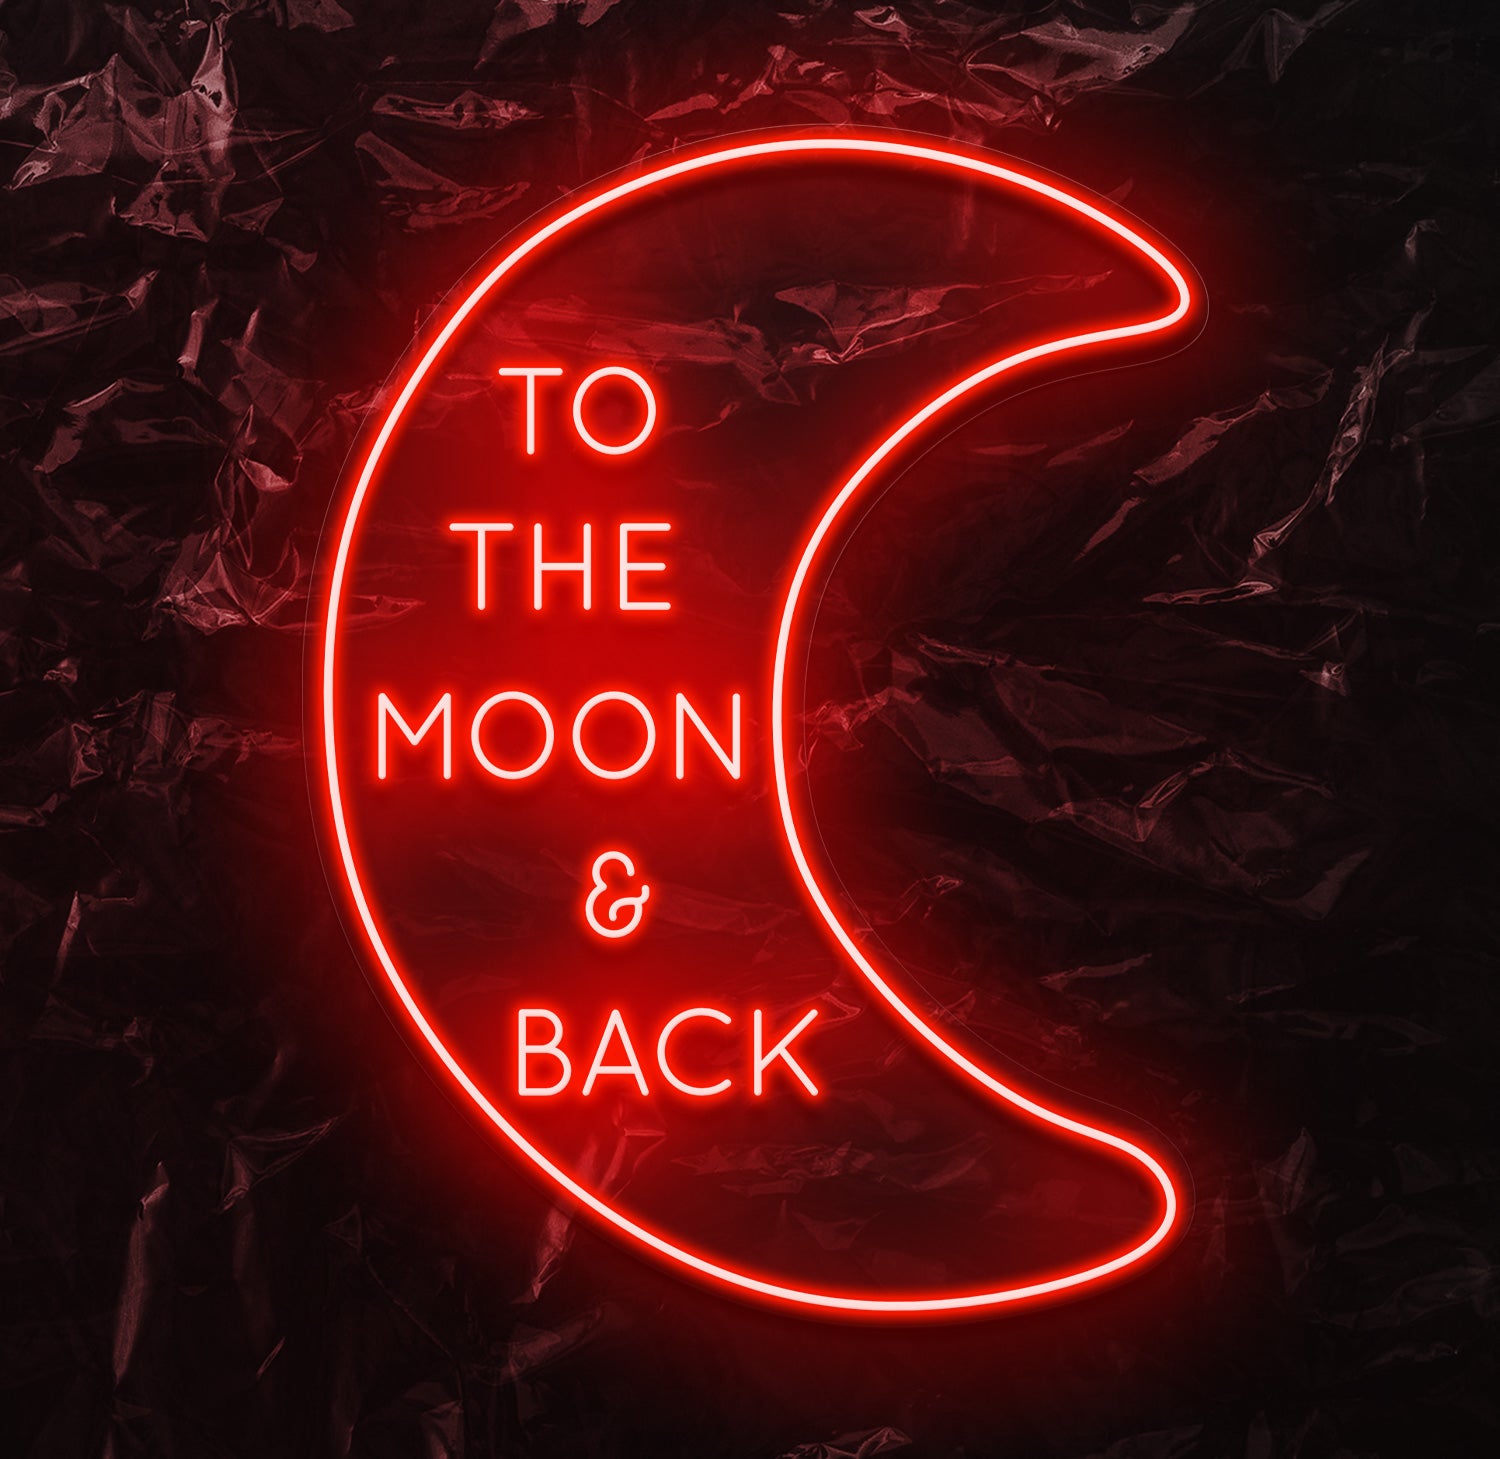 " To The Moon & Back" LED Neonschild - NEONEVERGLOW